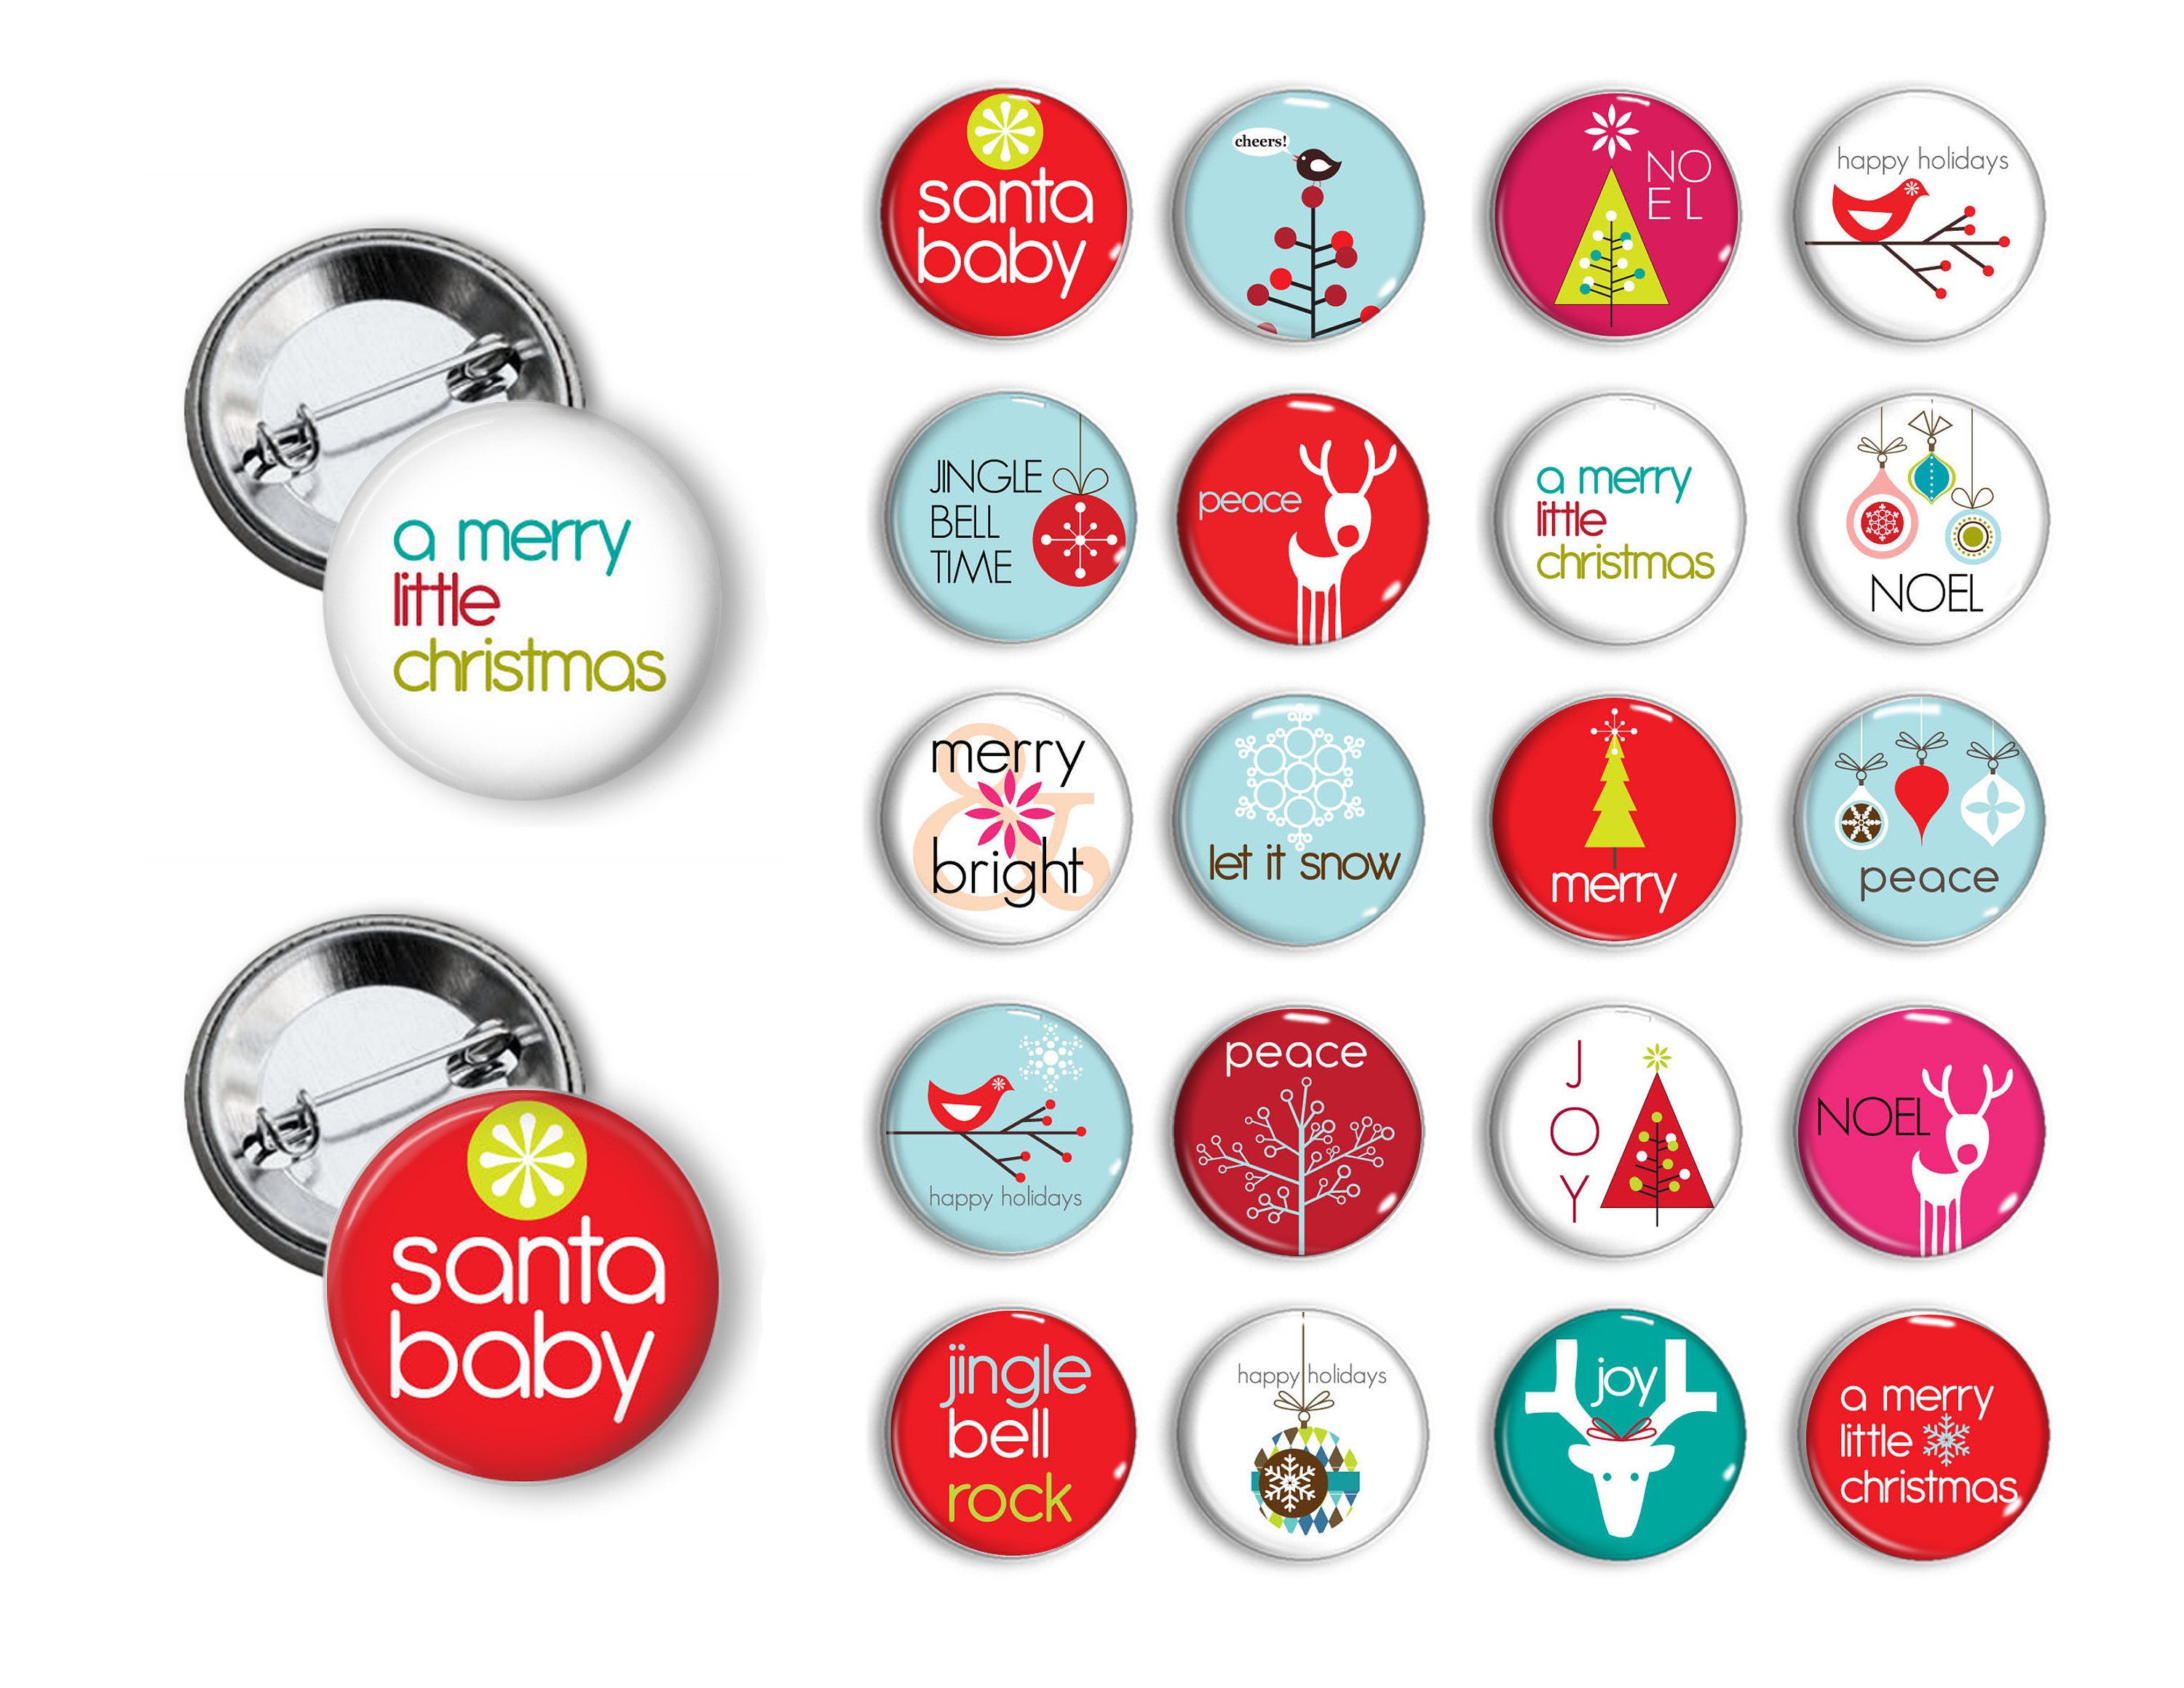 Mod Christmas Pins Santa Buttons 1.25 inch pinback buttons pins badges  magnets Party favors